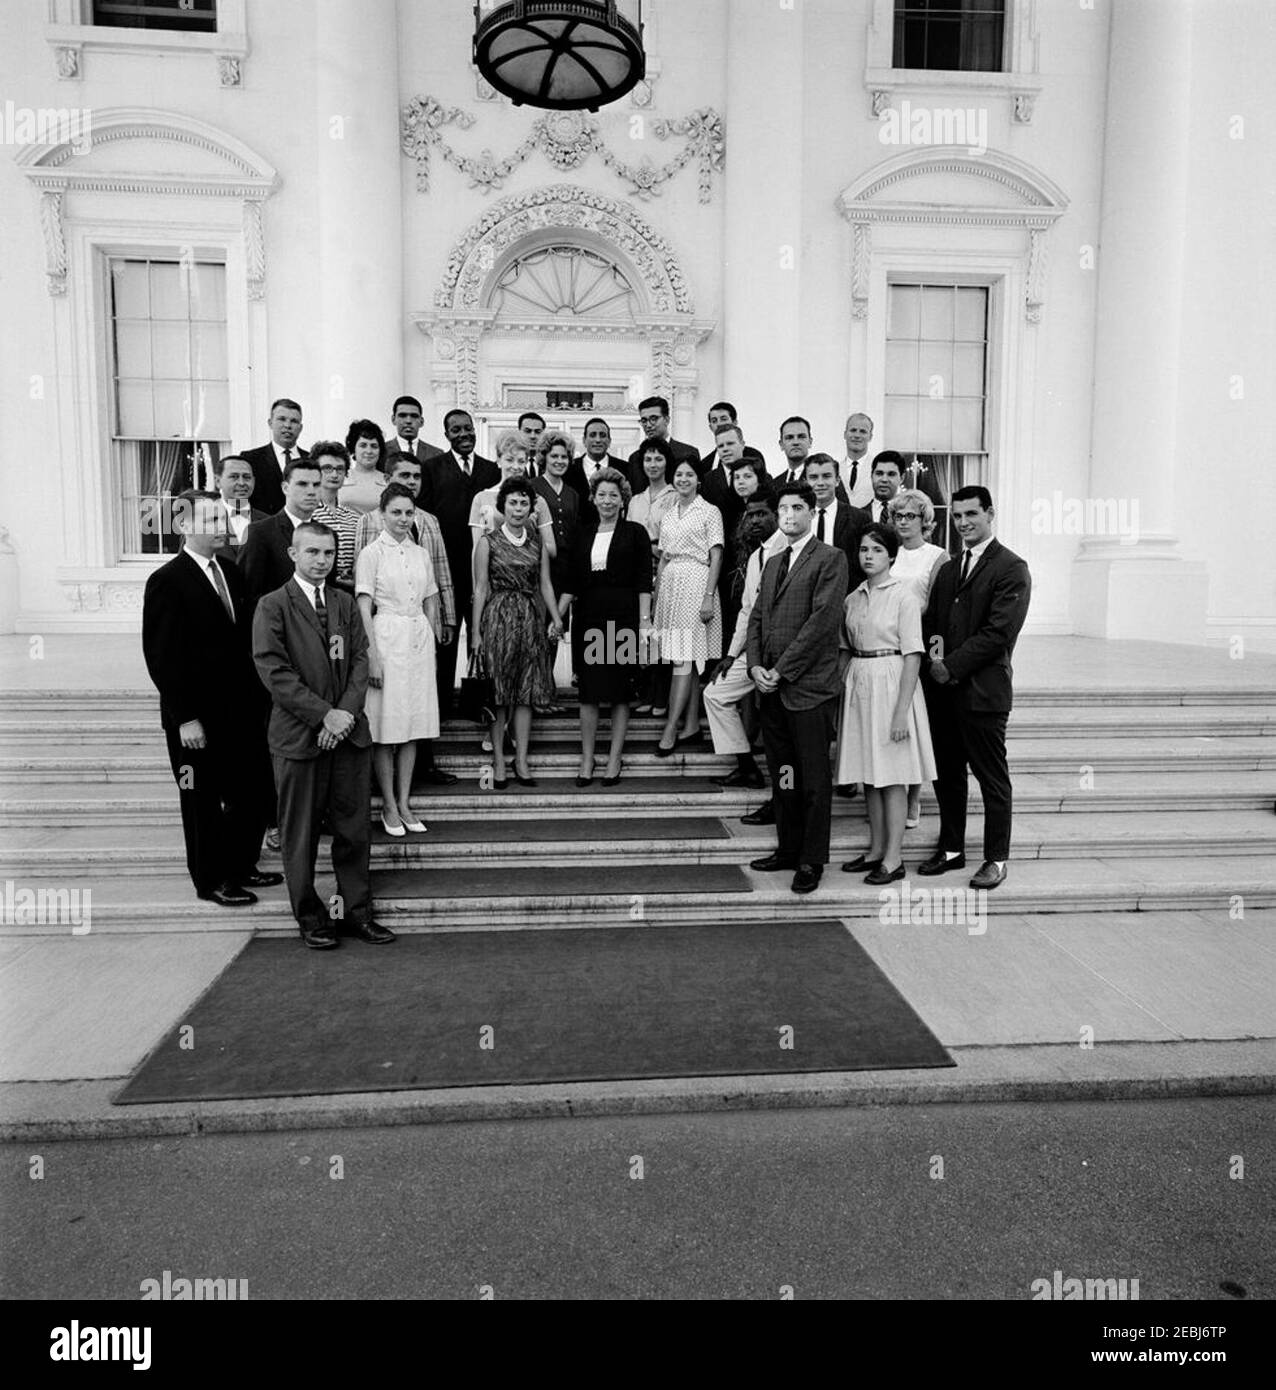 Director of the White House Summer Seminar Dorothy H. Davies with Seminar participants, and performers Tony Bennett and Eugene Wright. Participants in the White House Summer Seminar pose with singer Tony Bennett and bassist Eugene Wright following an American jazz concert sponsored by the Seminar the previous day. White House staff assistant and Summer Seminar Director, Dorothy H. Davies, stands at center. North Portico, White House, Washington, D.C. [Photograph by Harold Sellers] Stock Photo